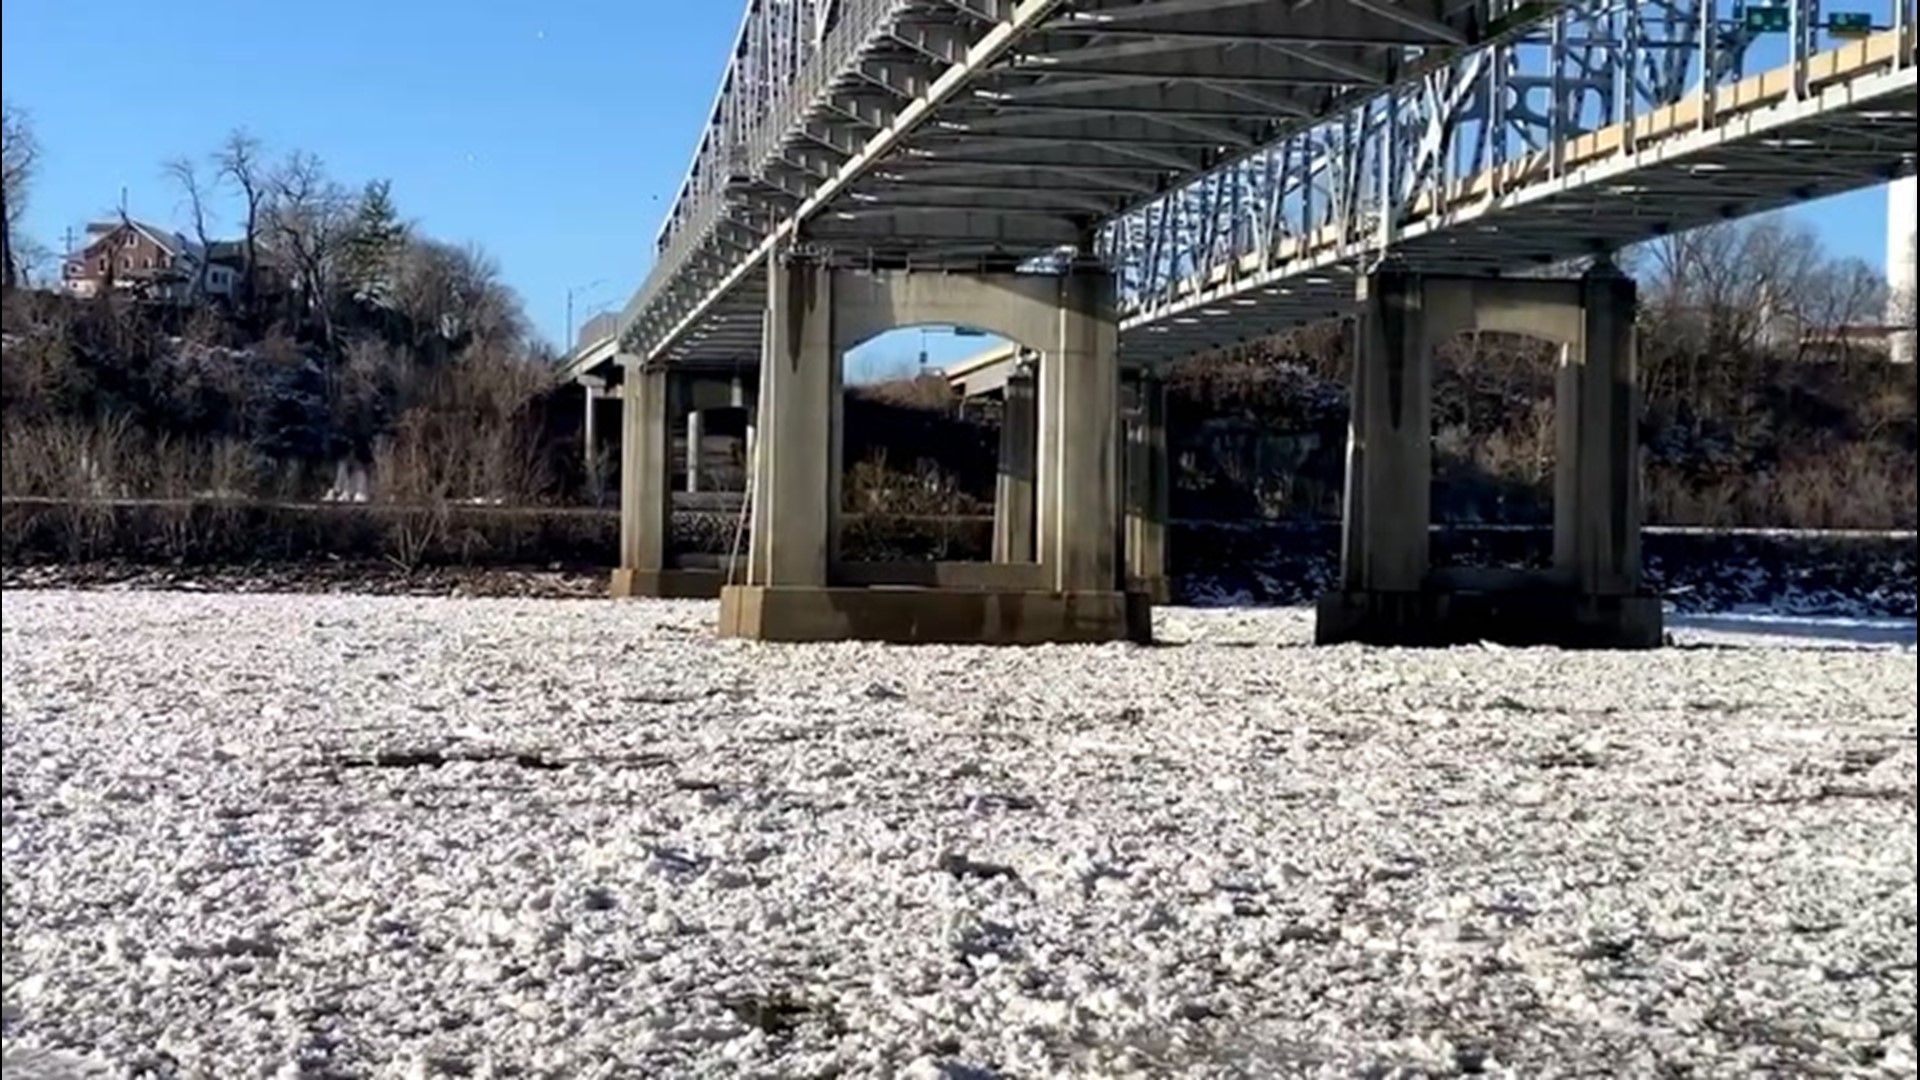 On Feb. 23, rising temperatures lead the ice in the Missouri River to melt and clear up jams throughout the waters in Jefferson City, Missouri.